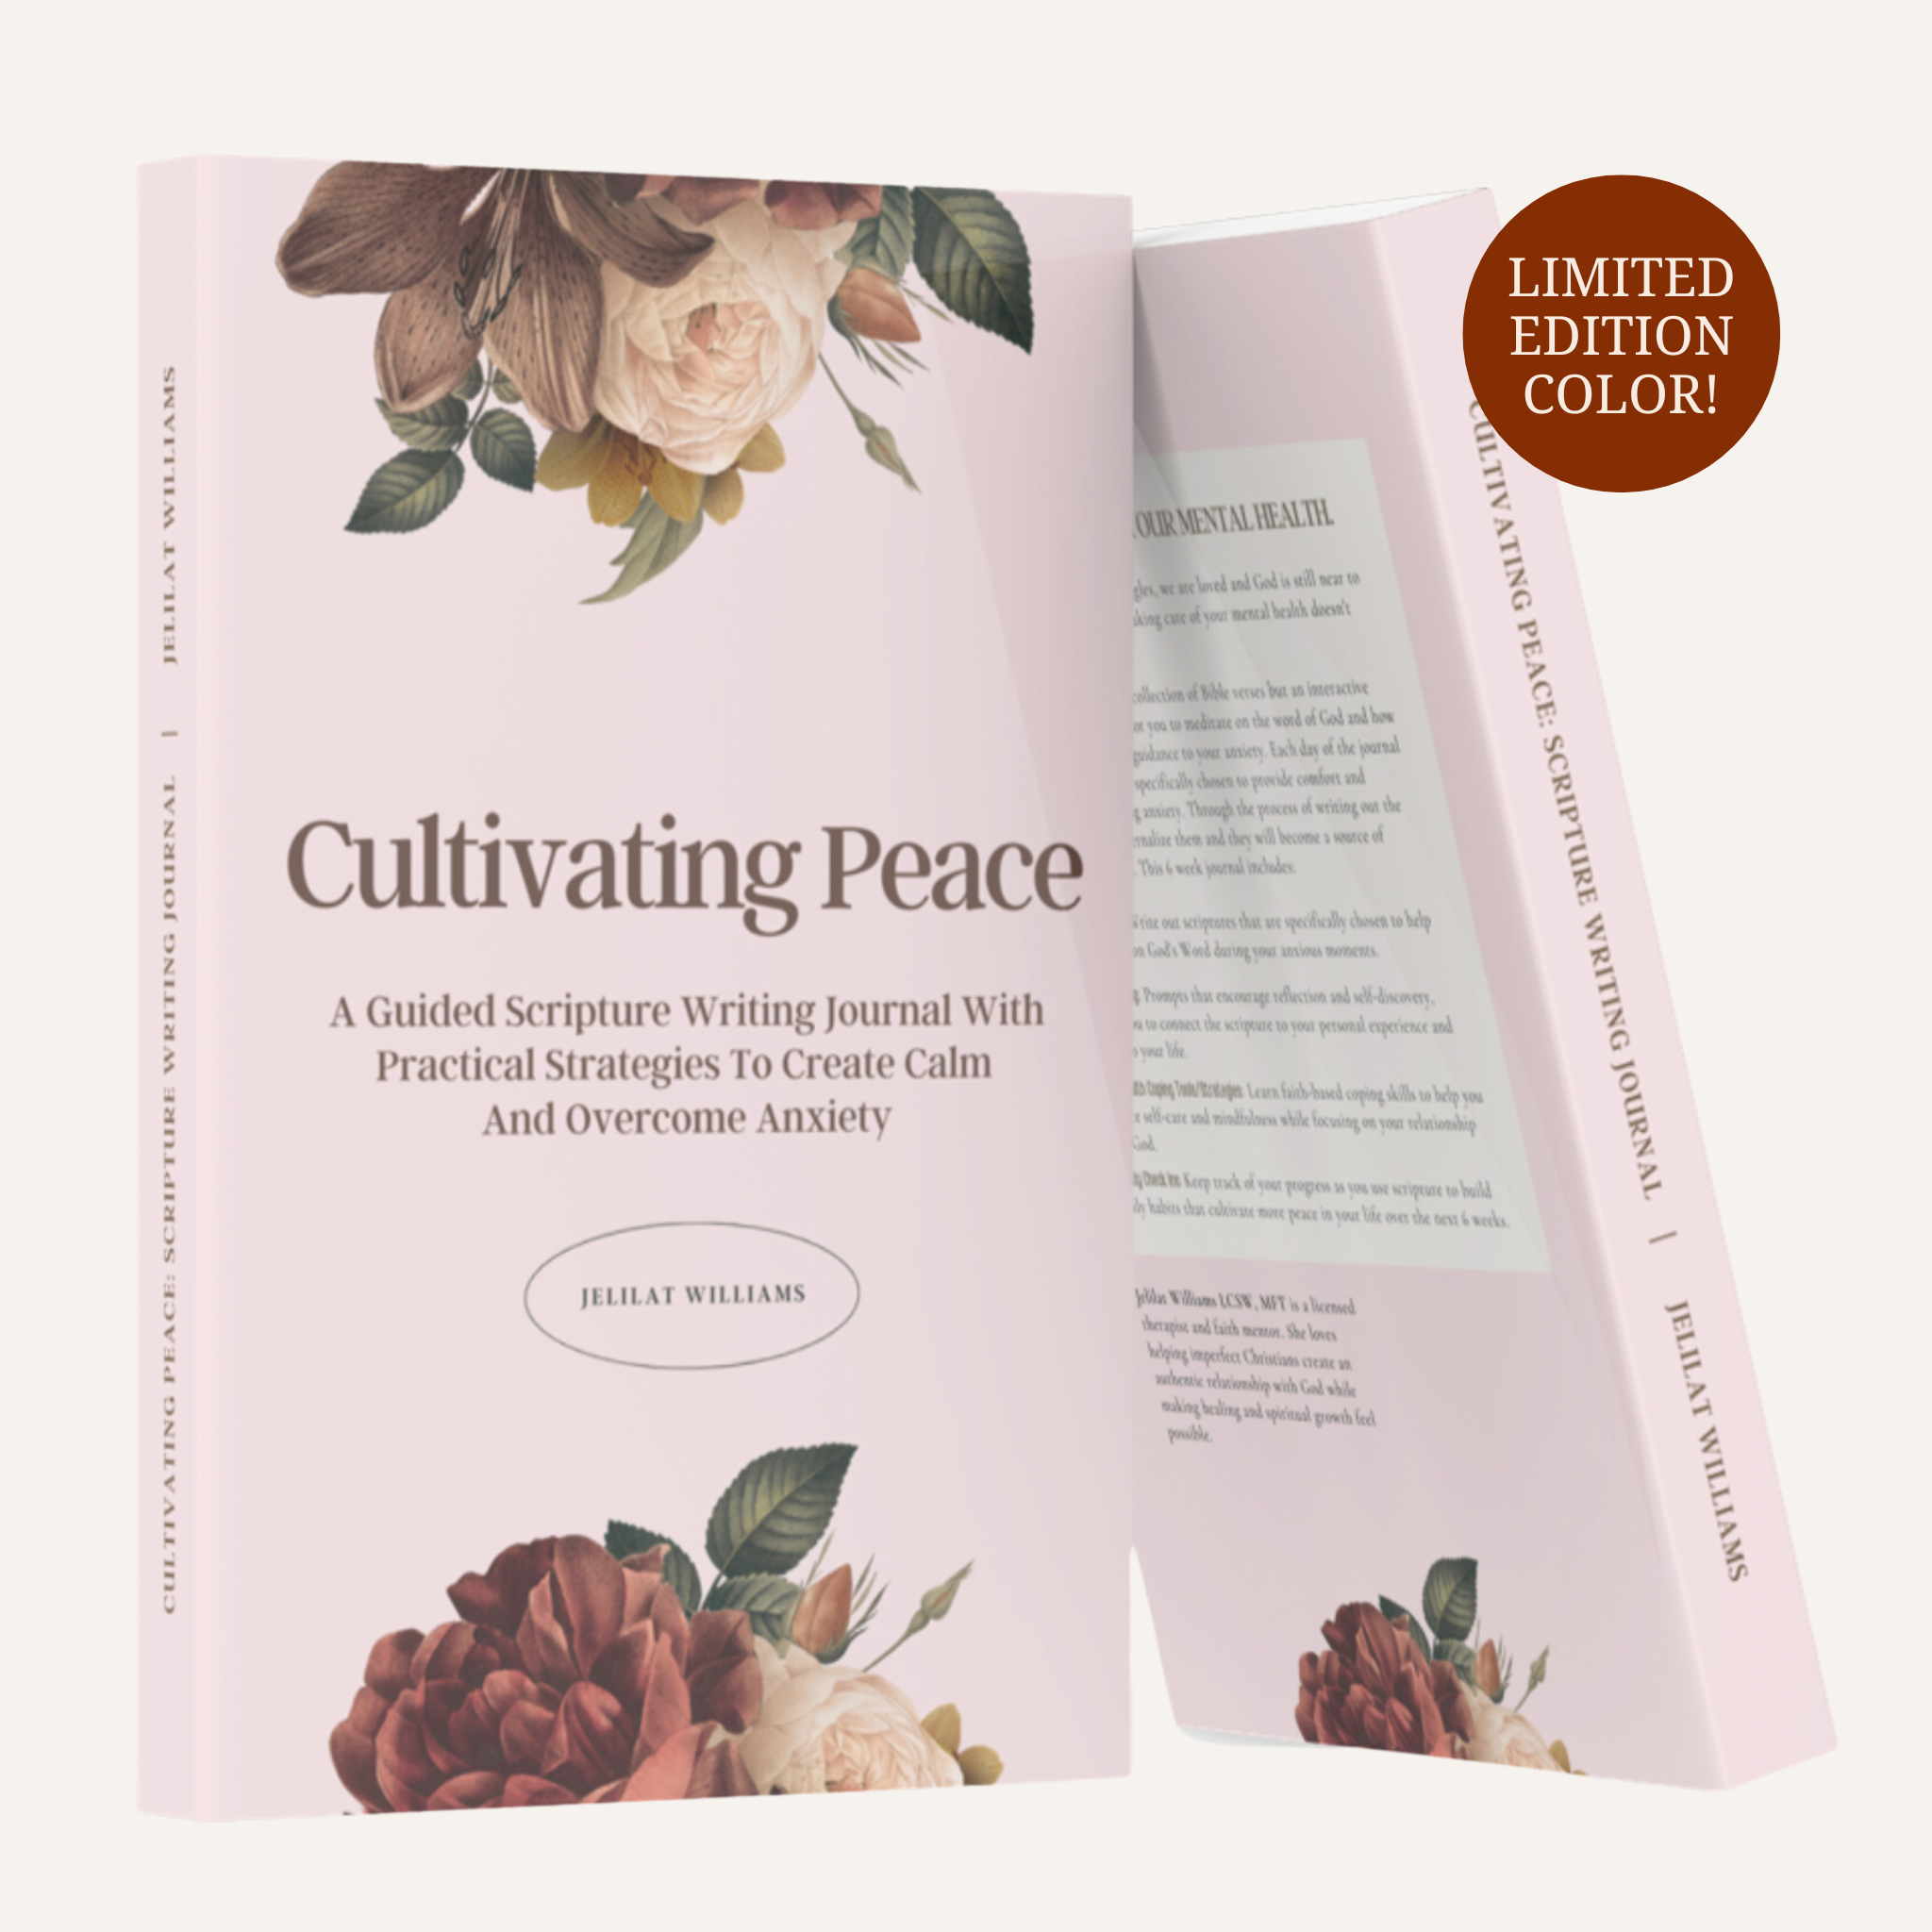 Cultivating Peace: A Guided Scripture Writing Journal With Practical Strategies To Create Calm And Manage Anxiety